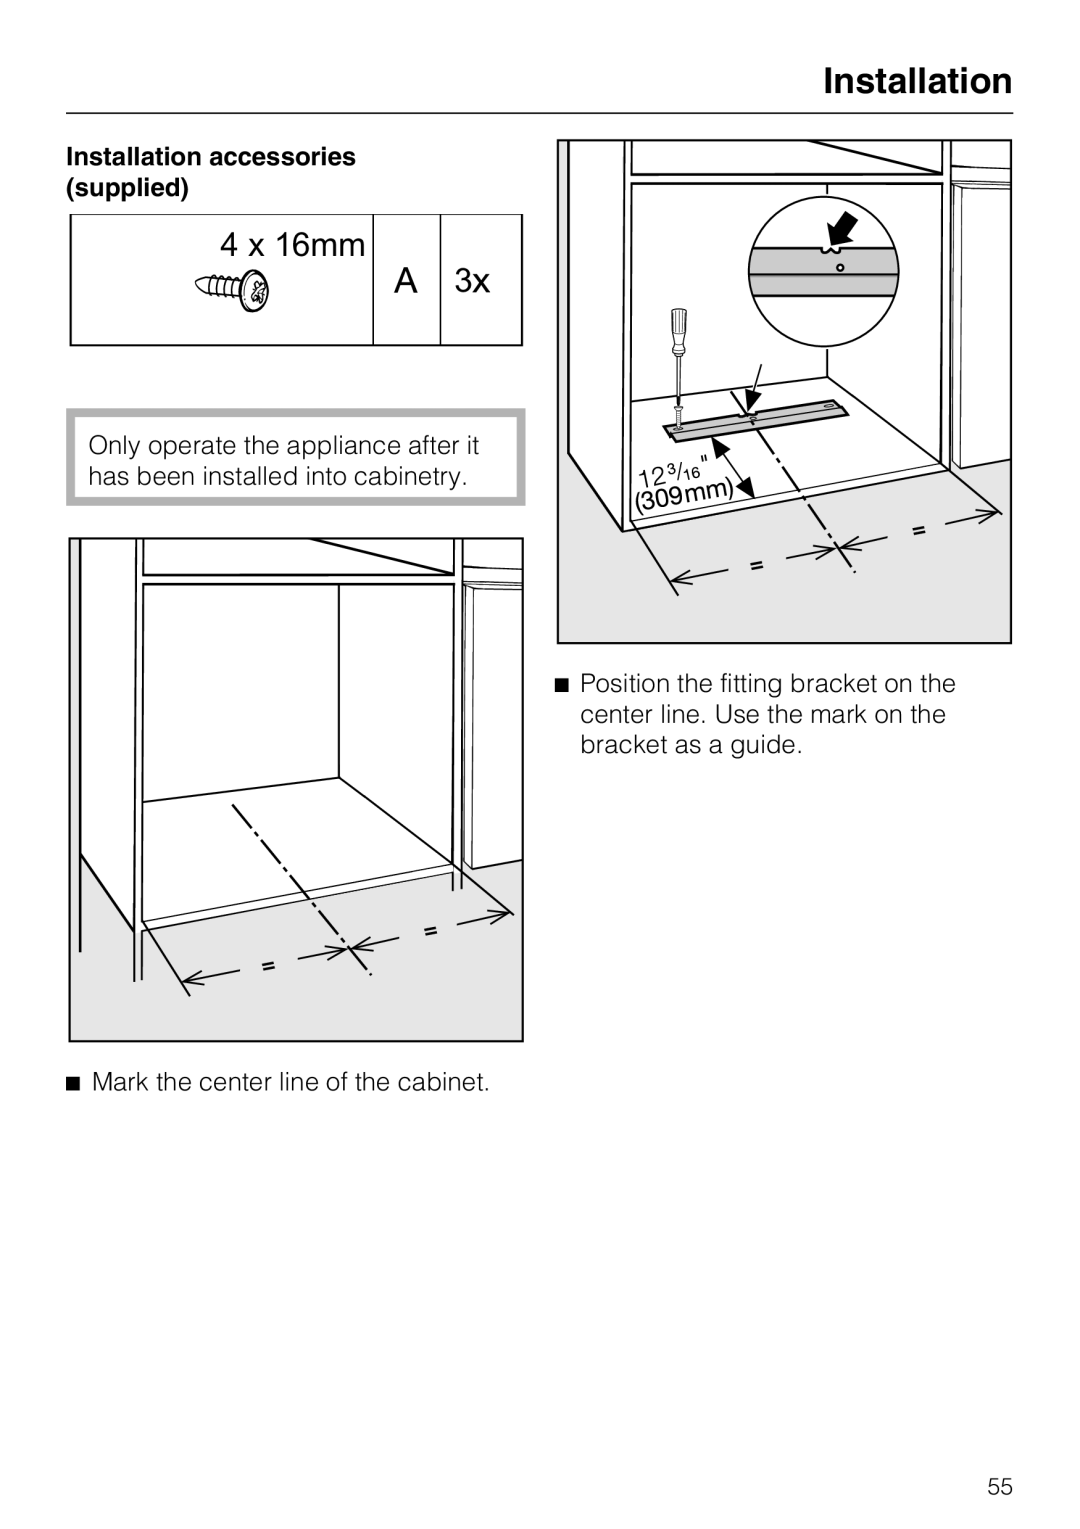 Miele 09 798 350 installation instructions 4 x 16mm, Installation accessories supplied 